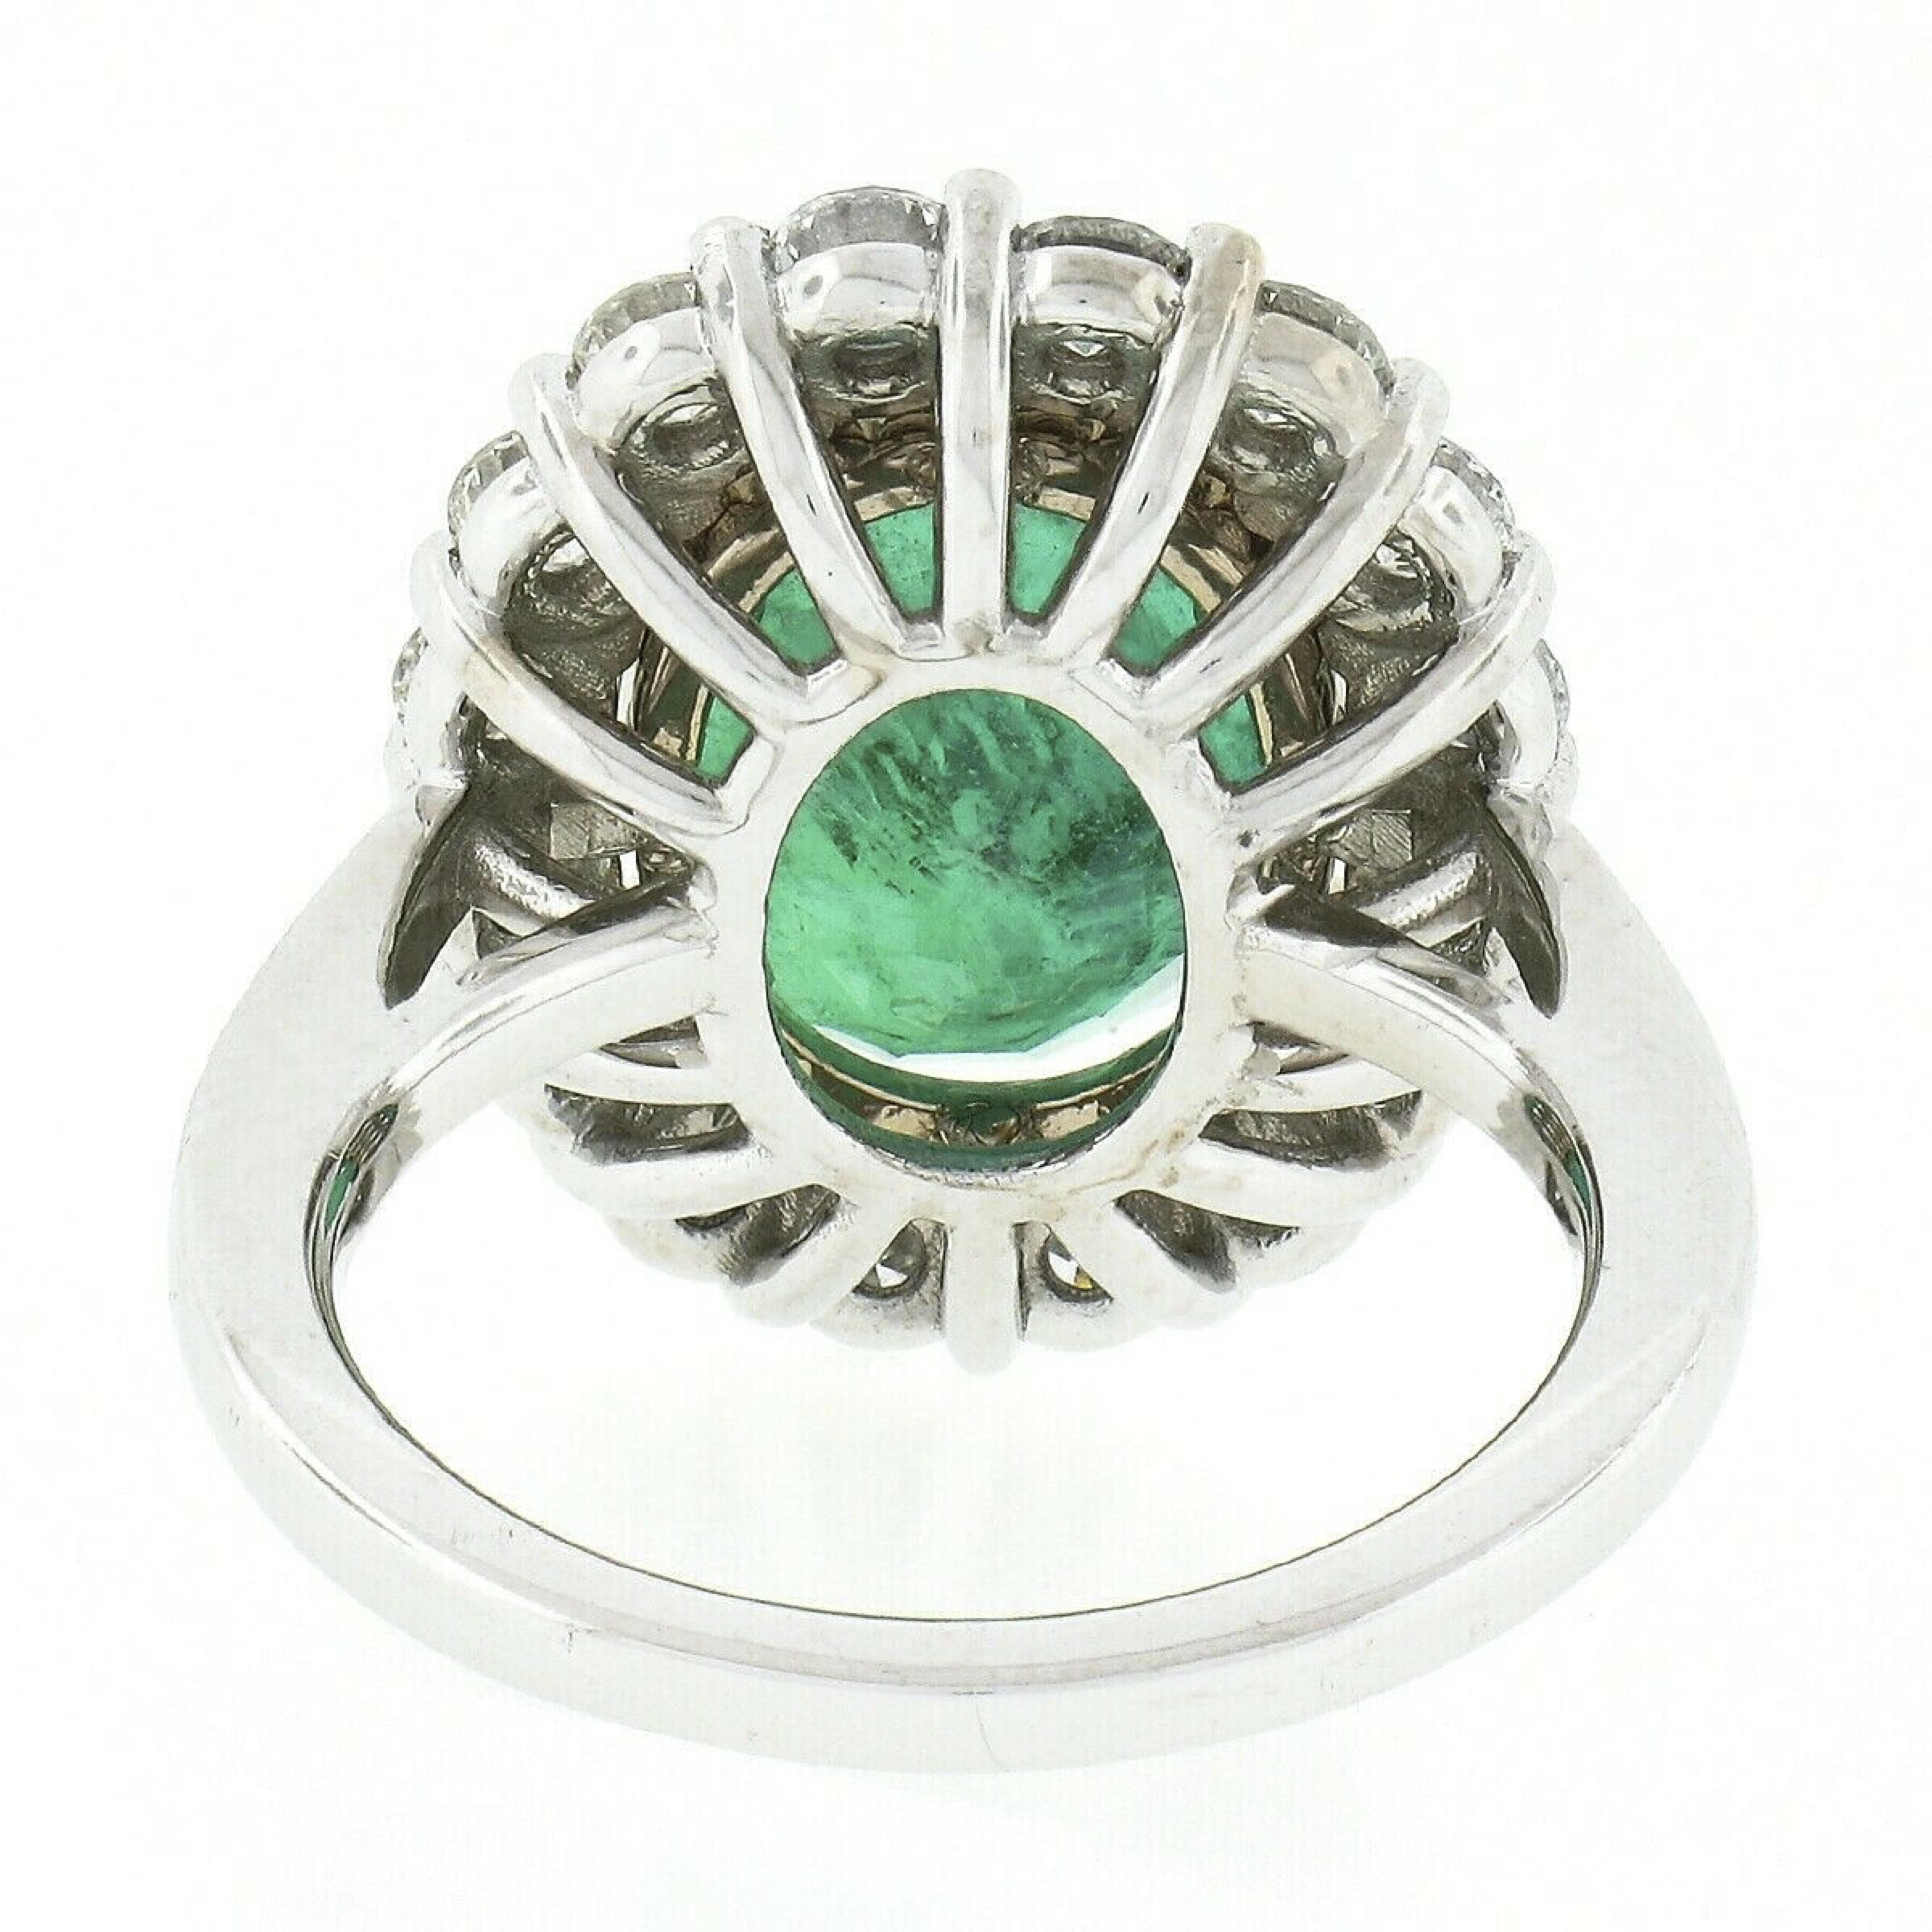 New 18k TT Gold 7.94ct GIA Oval Emerald w/ Diamond Halo Engagement Cocktail Ring 3